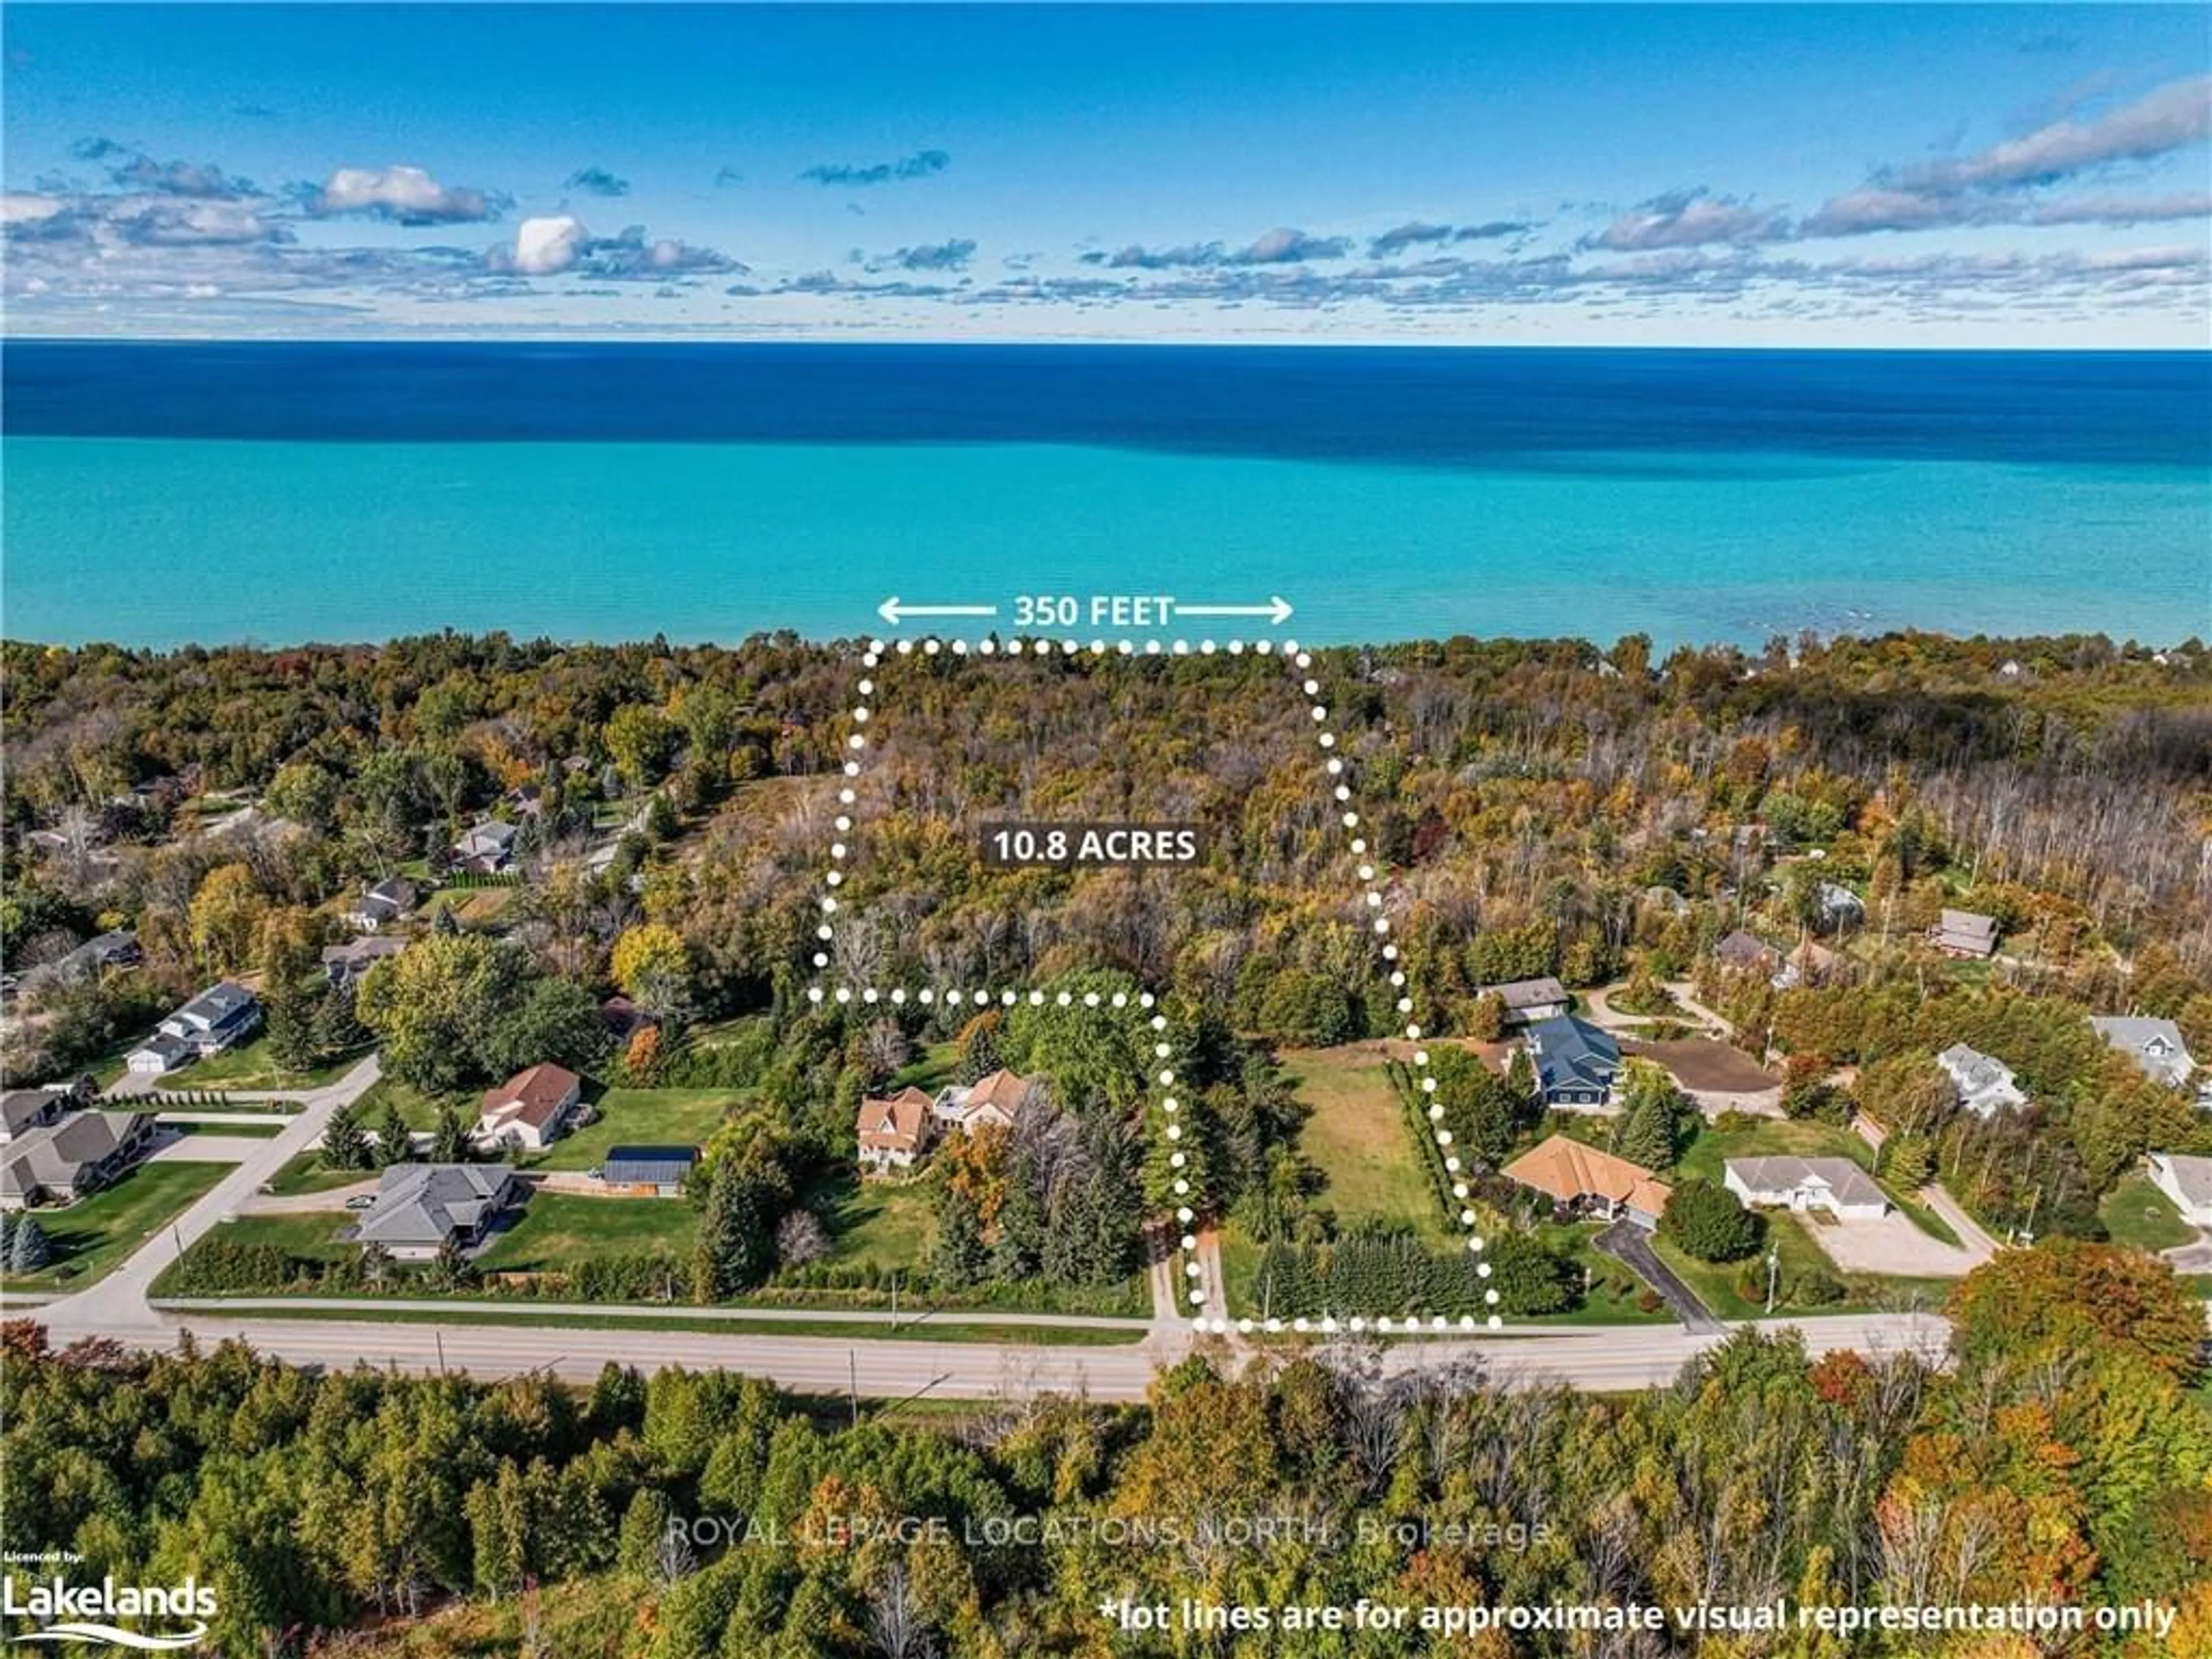 Lakeview for 229 Bruce 23 Rd, Kincardine Ontario N2Z 2X6